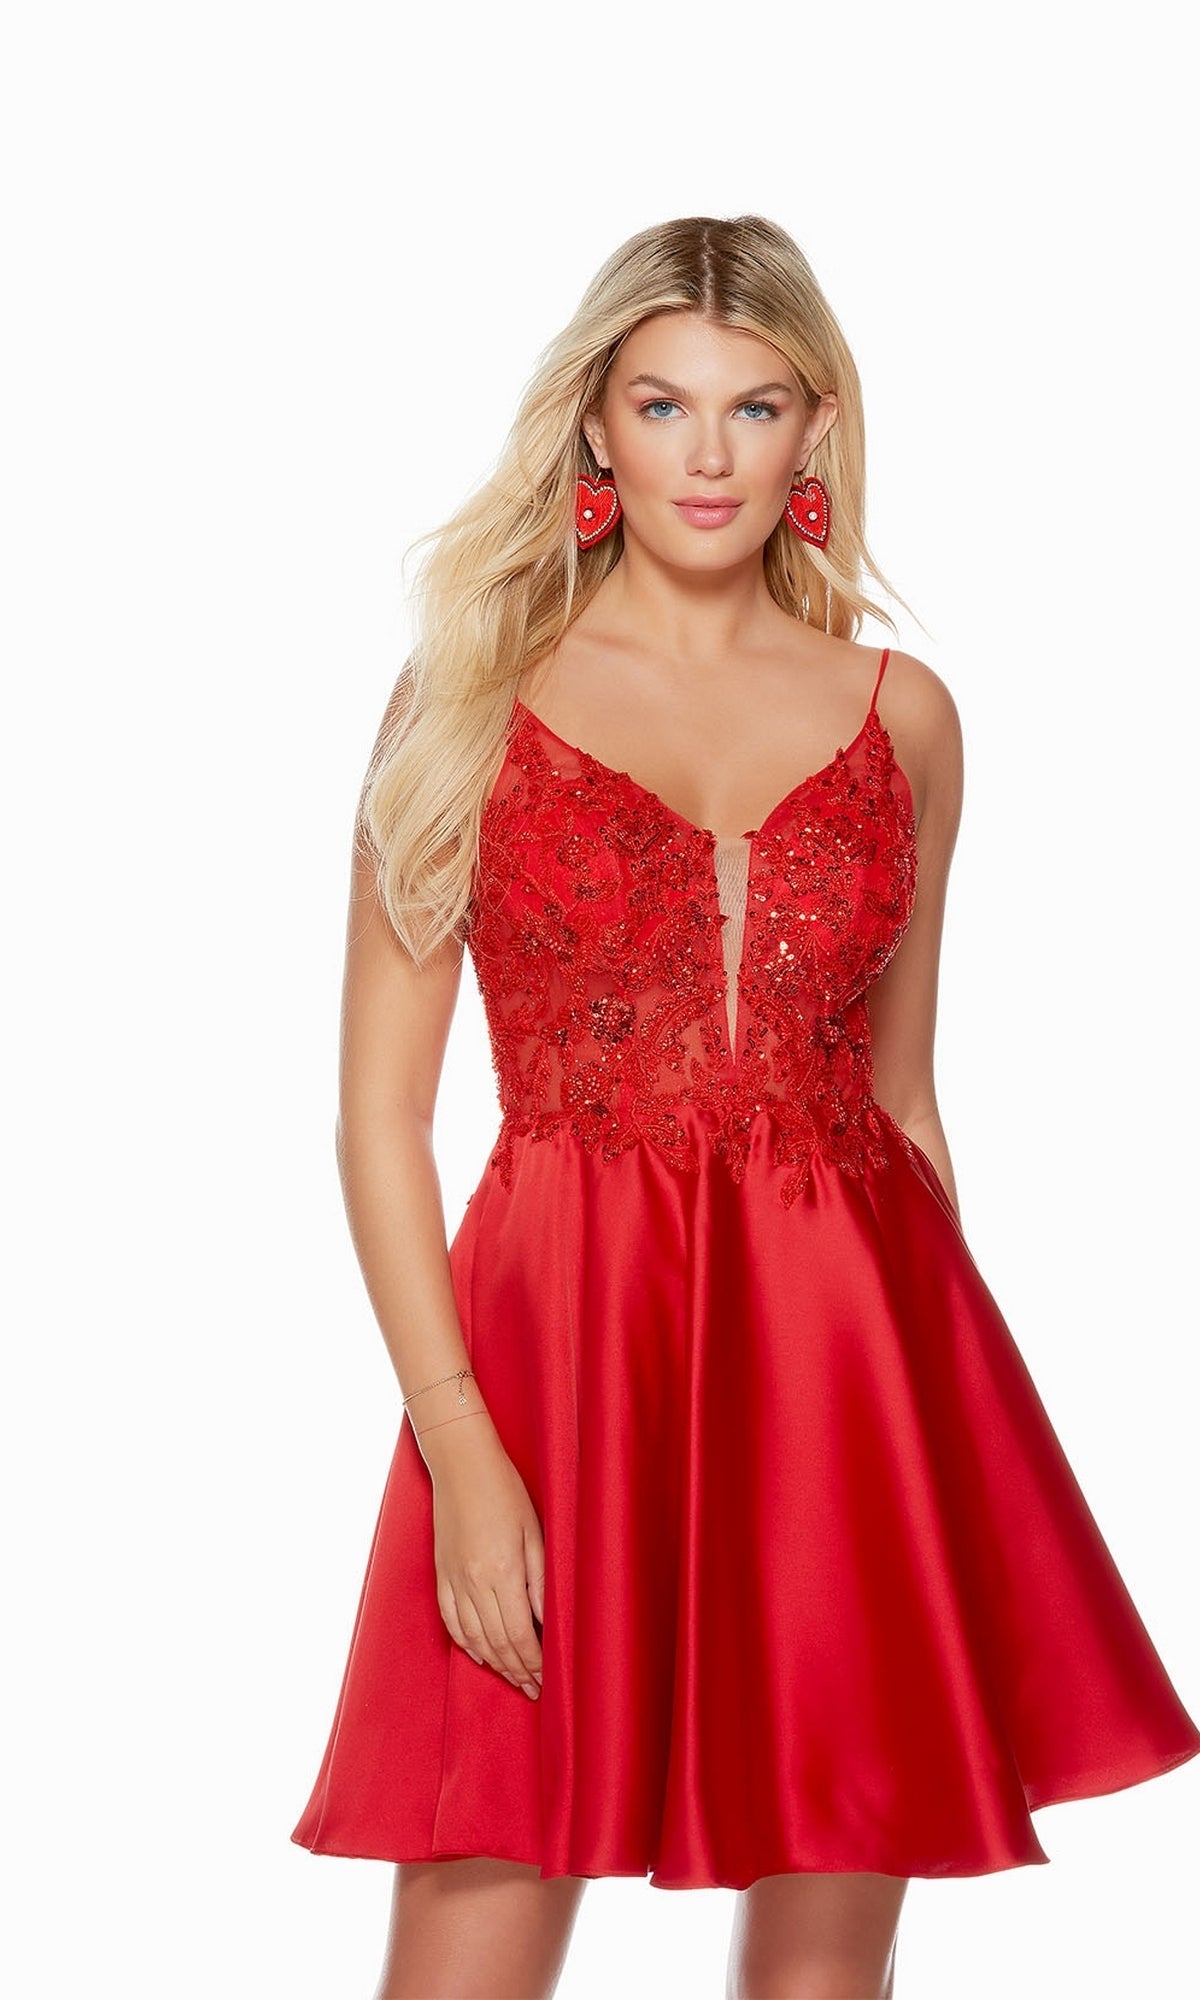 Red Alyce Red Short Homecoming Dress 3120